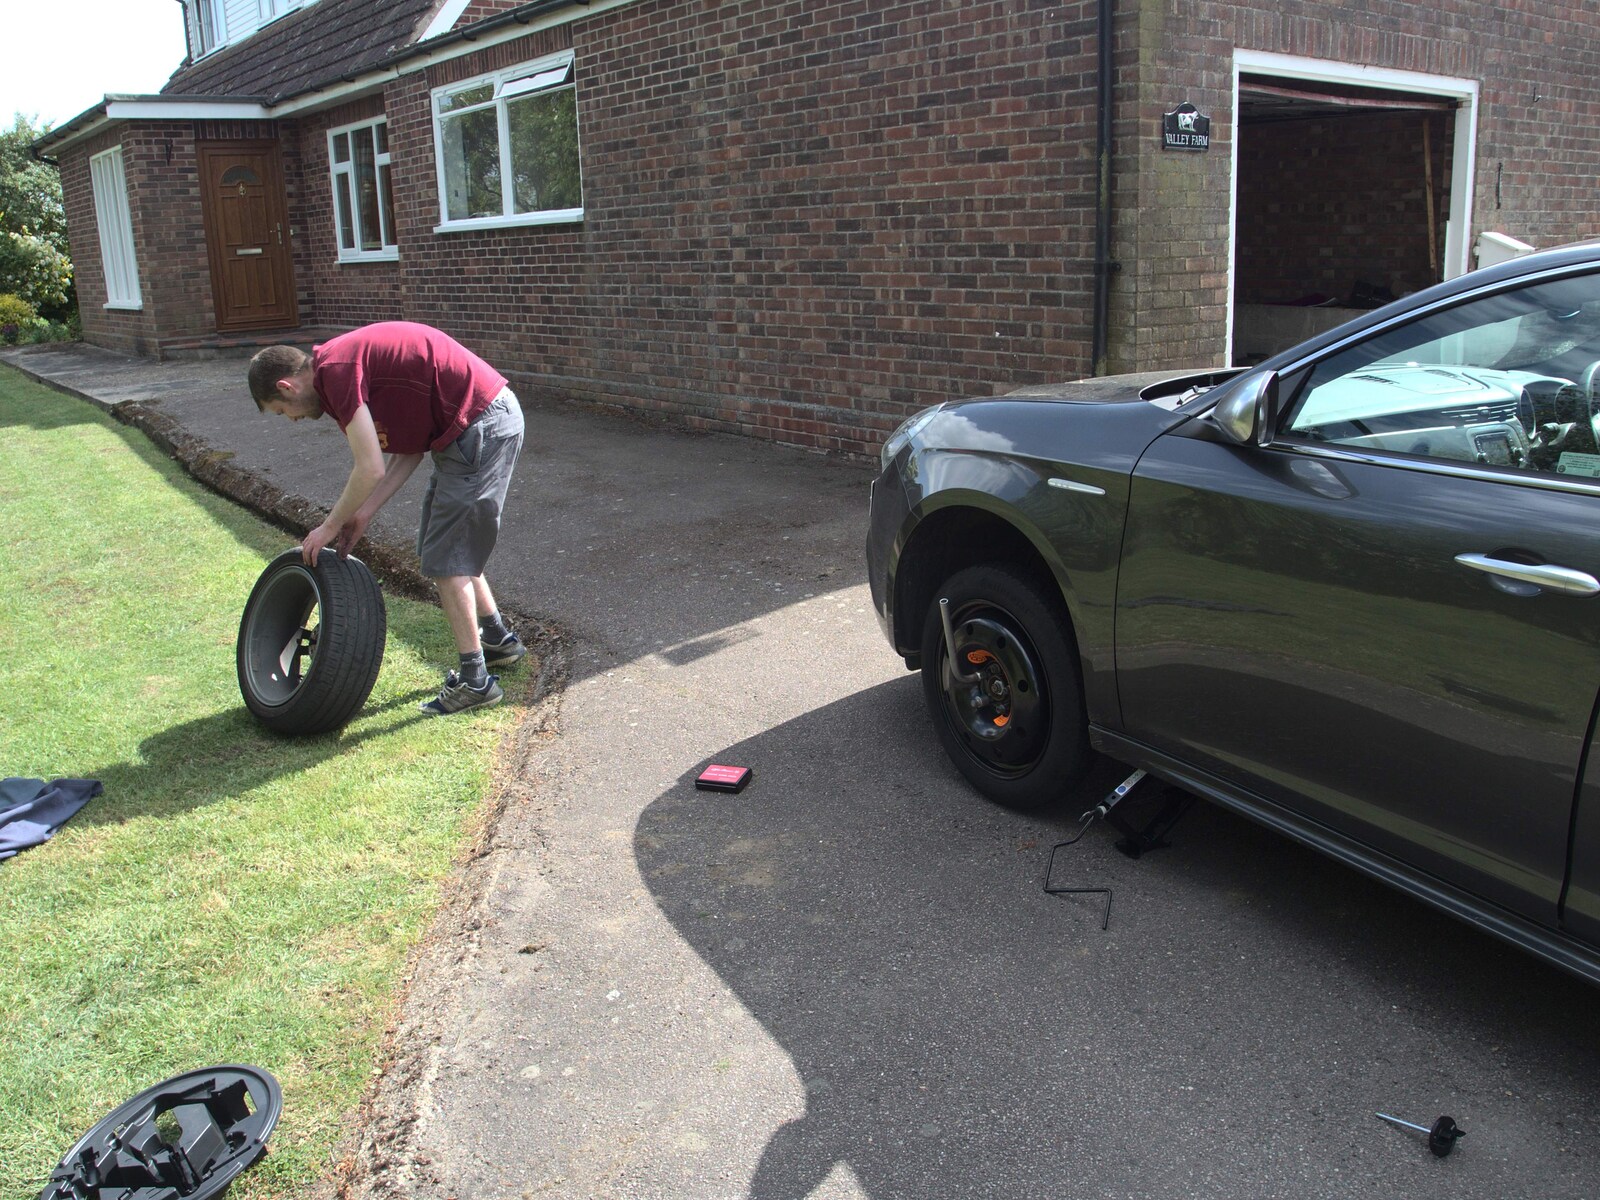 The Boy Phil is sorting out a flat tyre from A Derelict Petrol Station, Palgrave, Suffolk - 16th May 2015